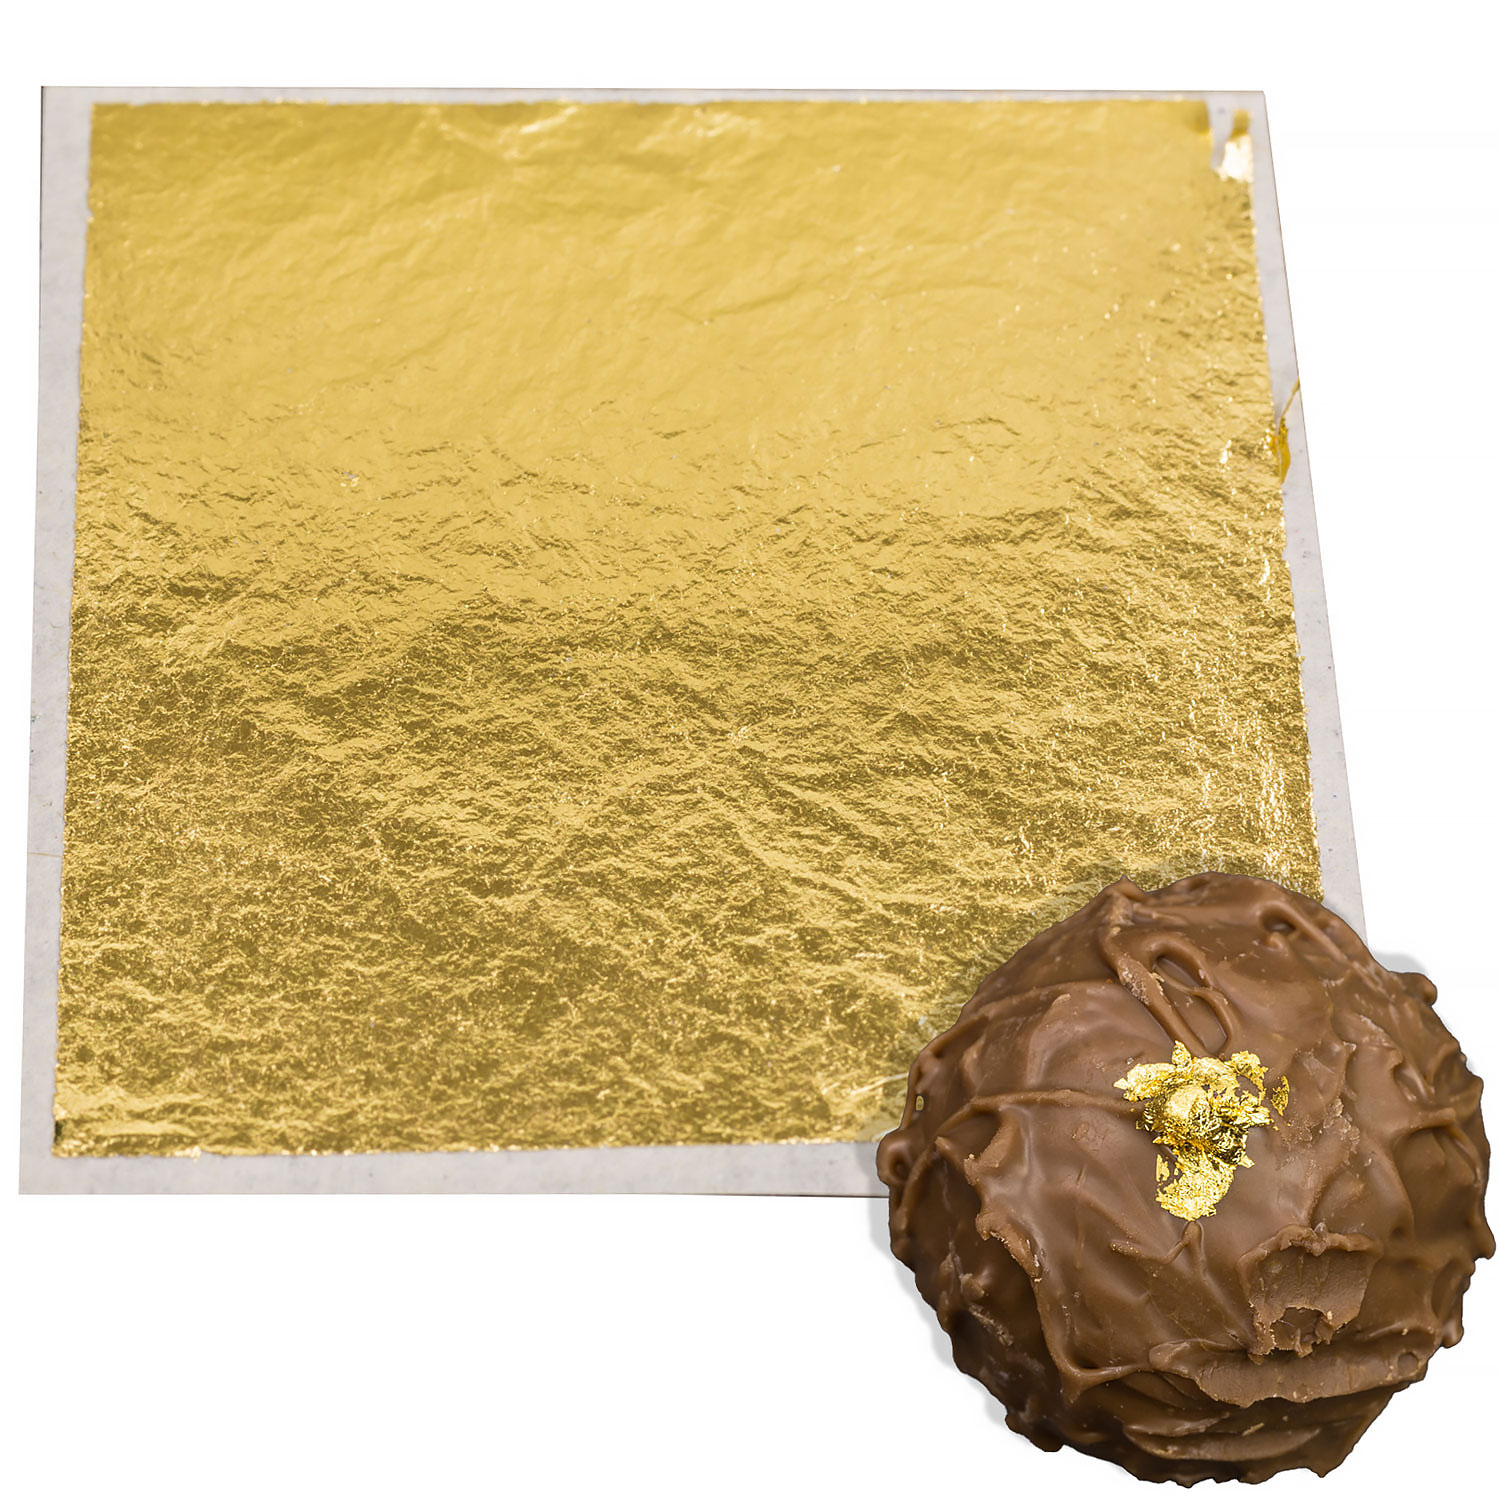 What Is Edible Gold Leaf?